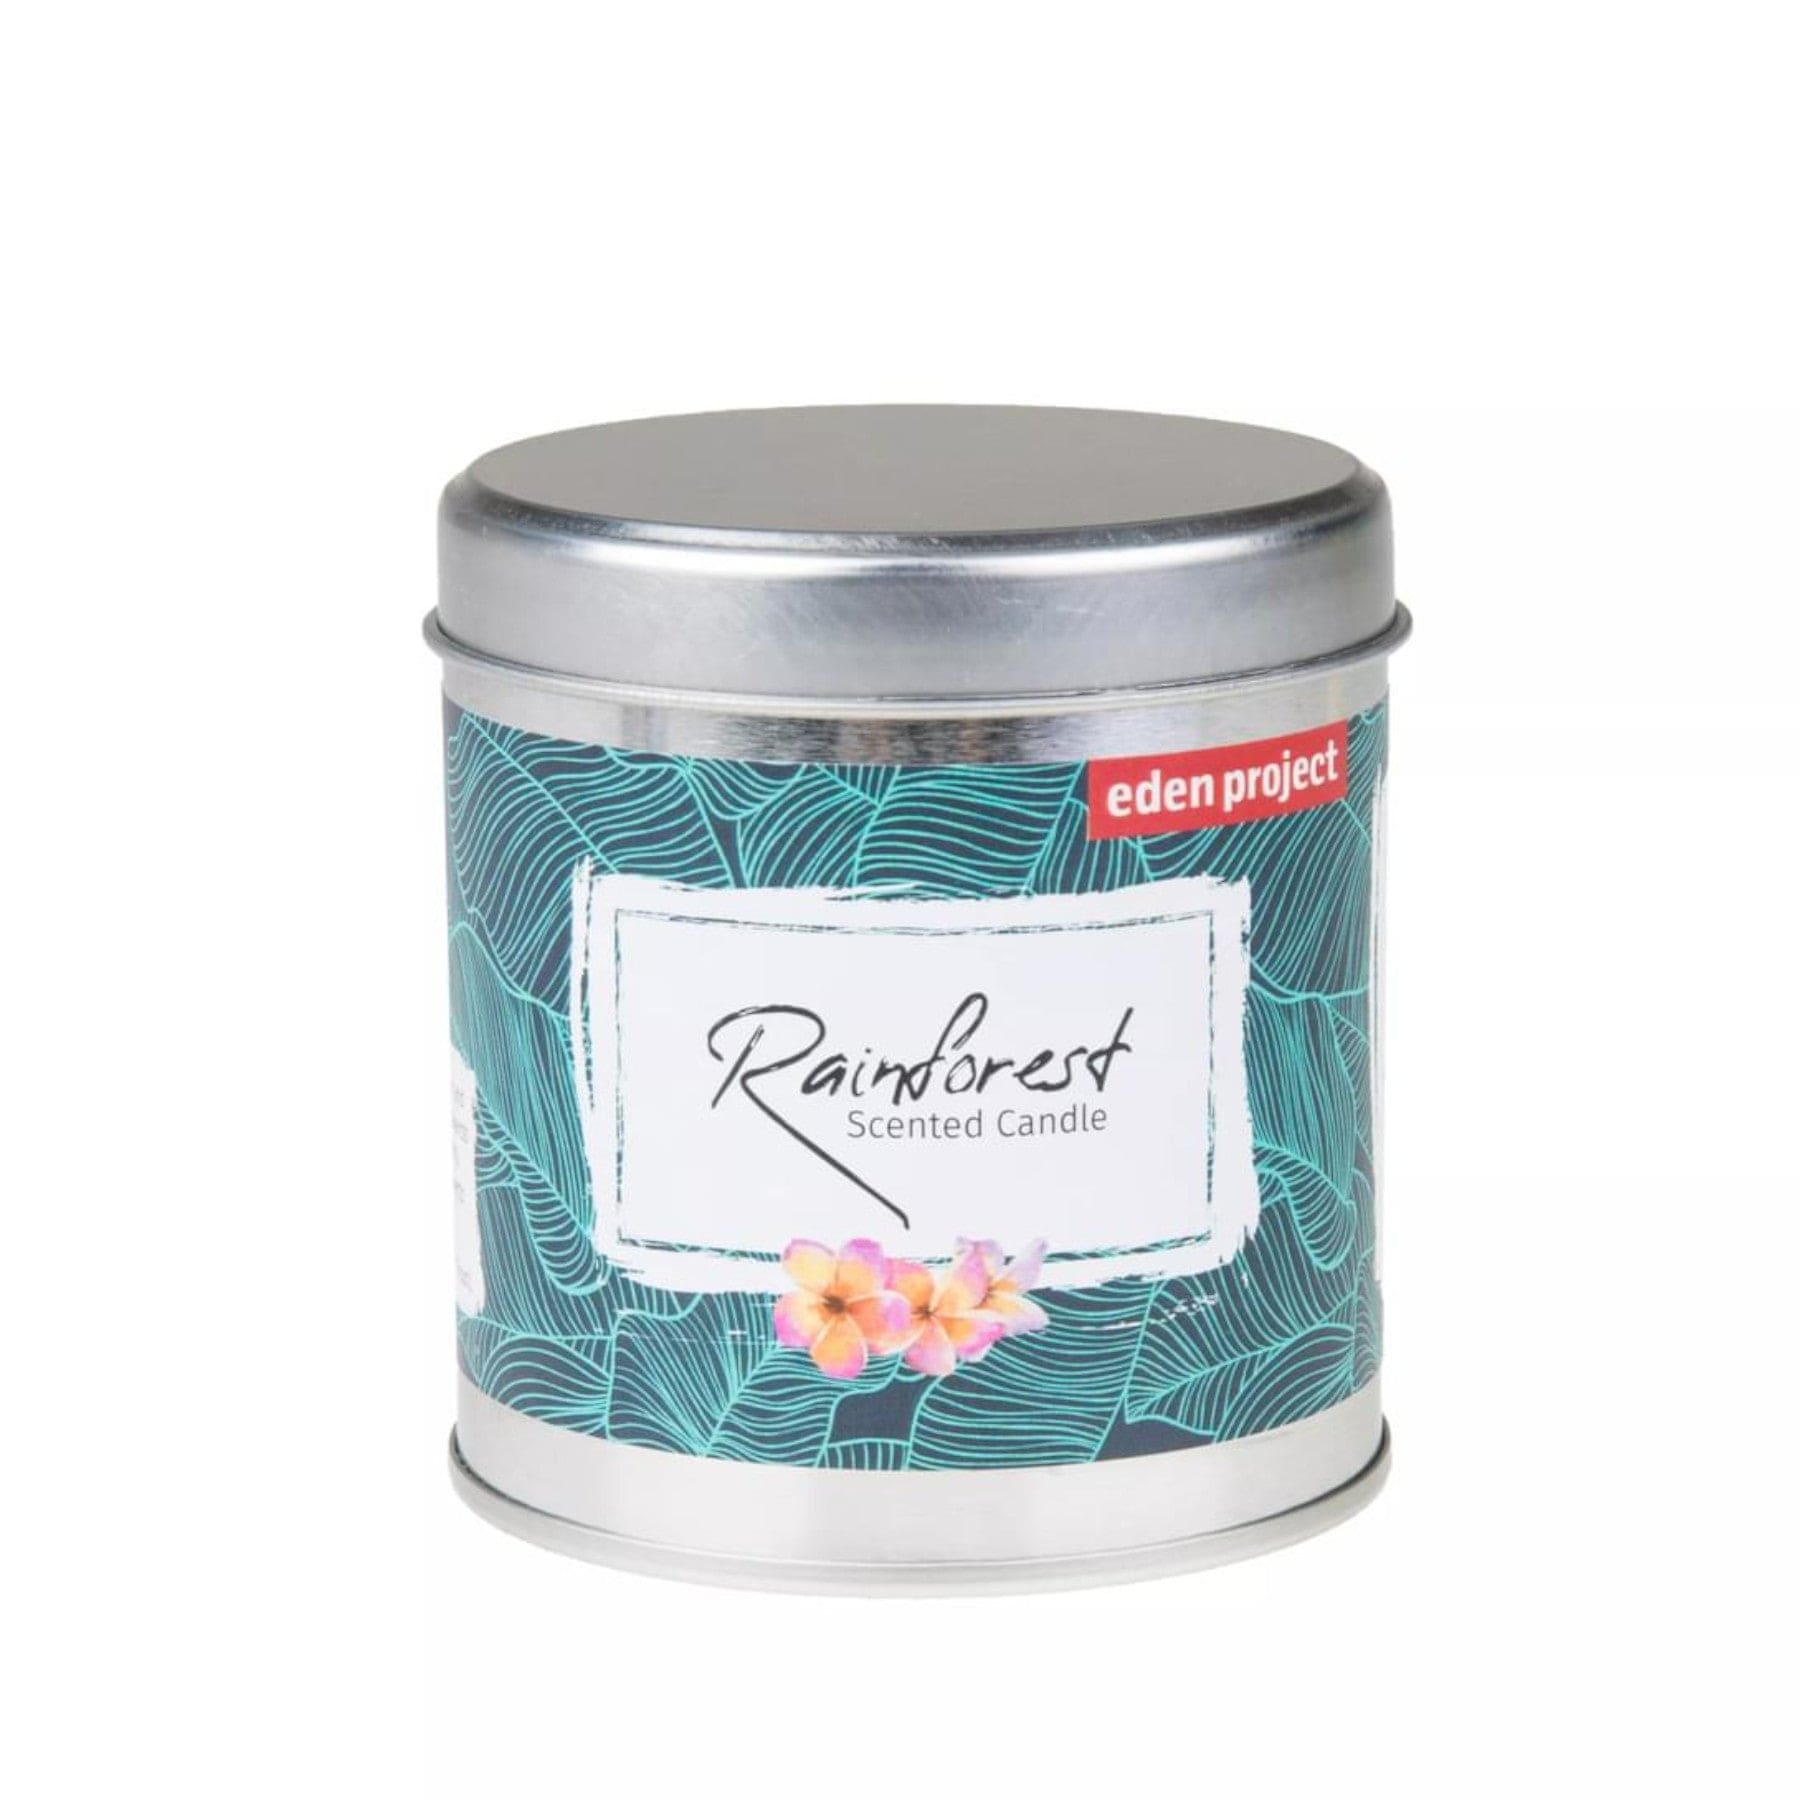 Eden Project Rainforest scented candle in tin with tropical floral design on white background